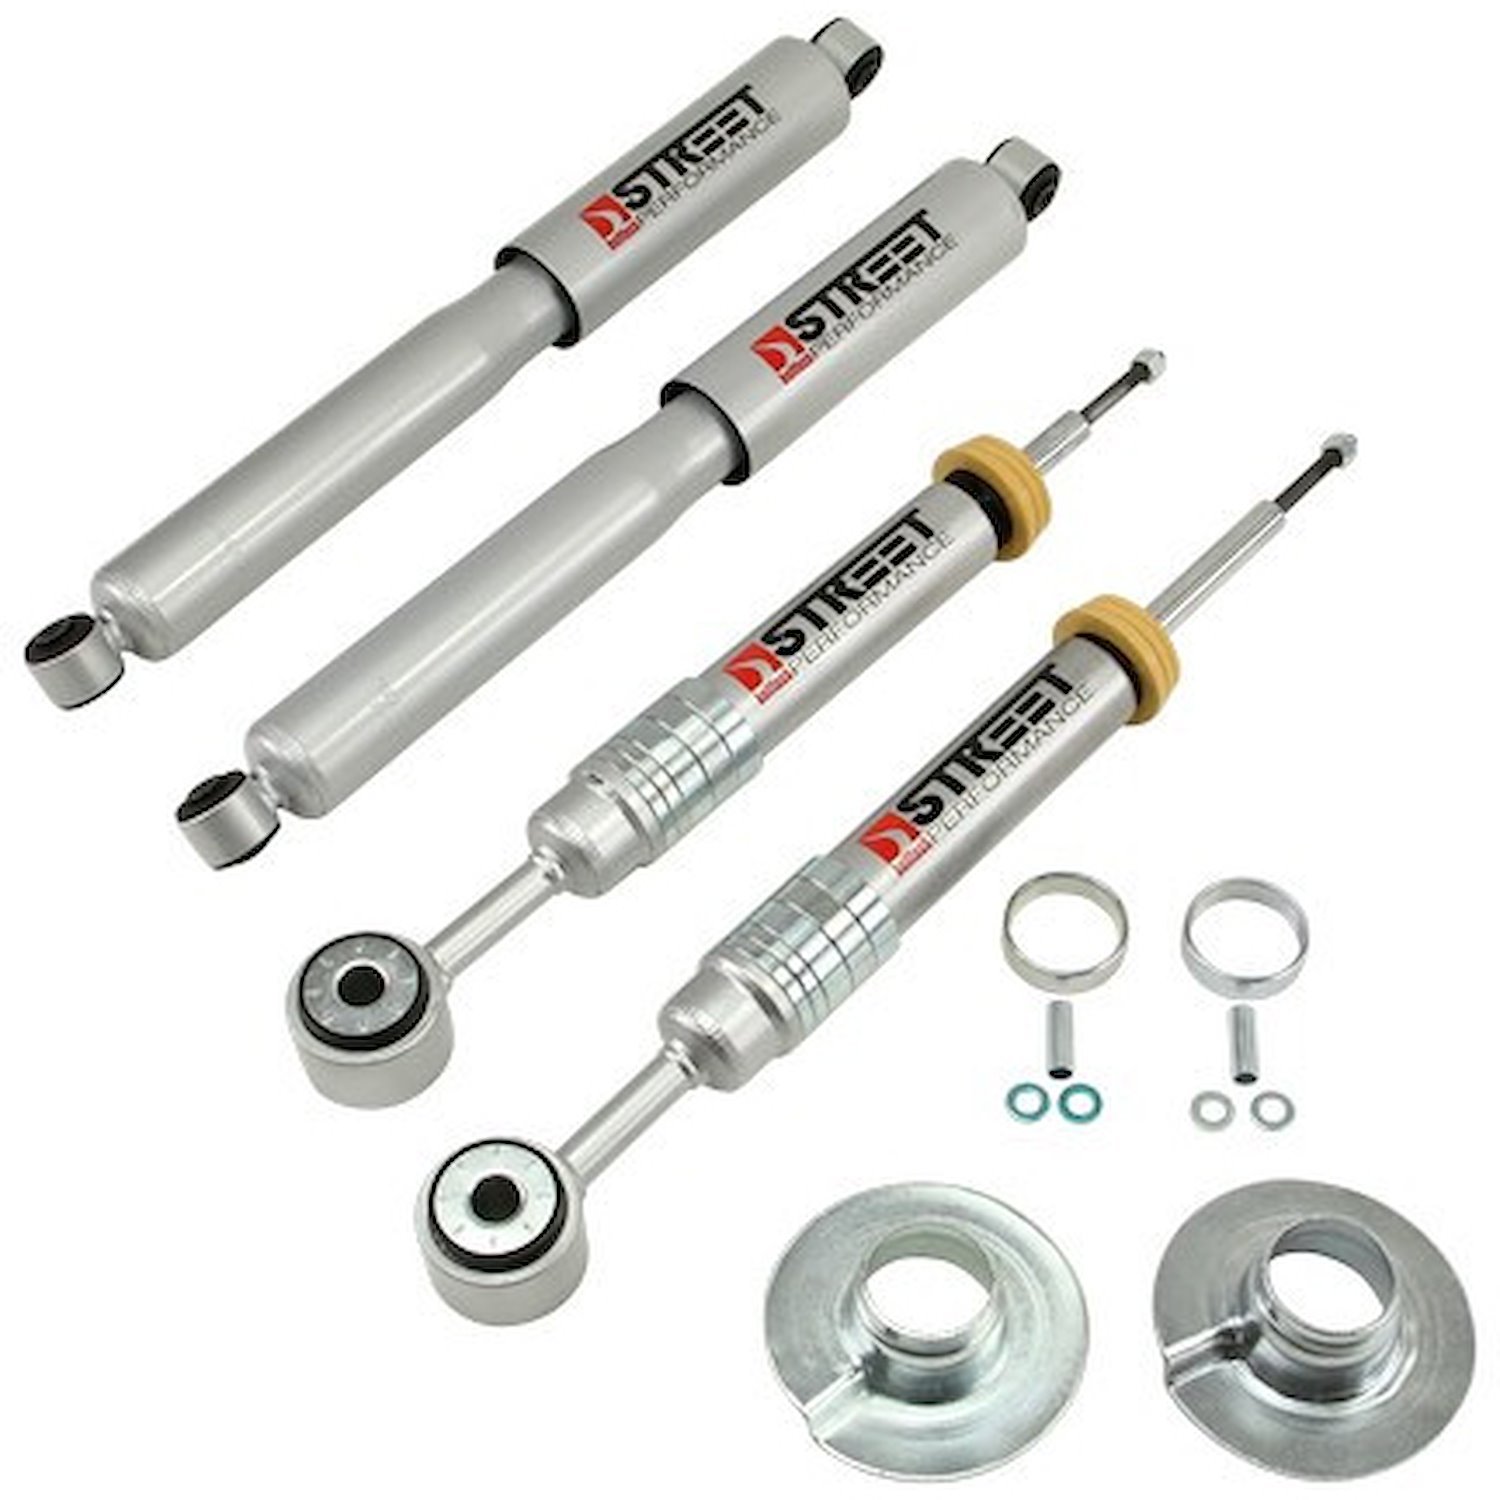 Street Performance OEM Shock Set for 2004-2008 Ford F-150 4WD